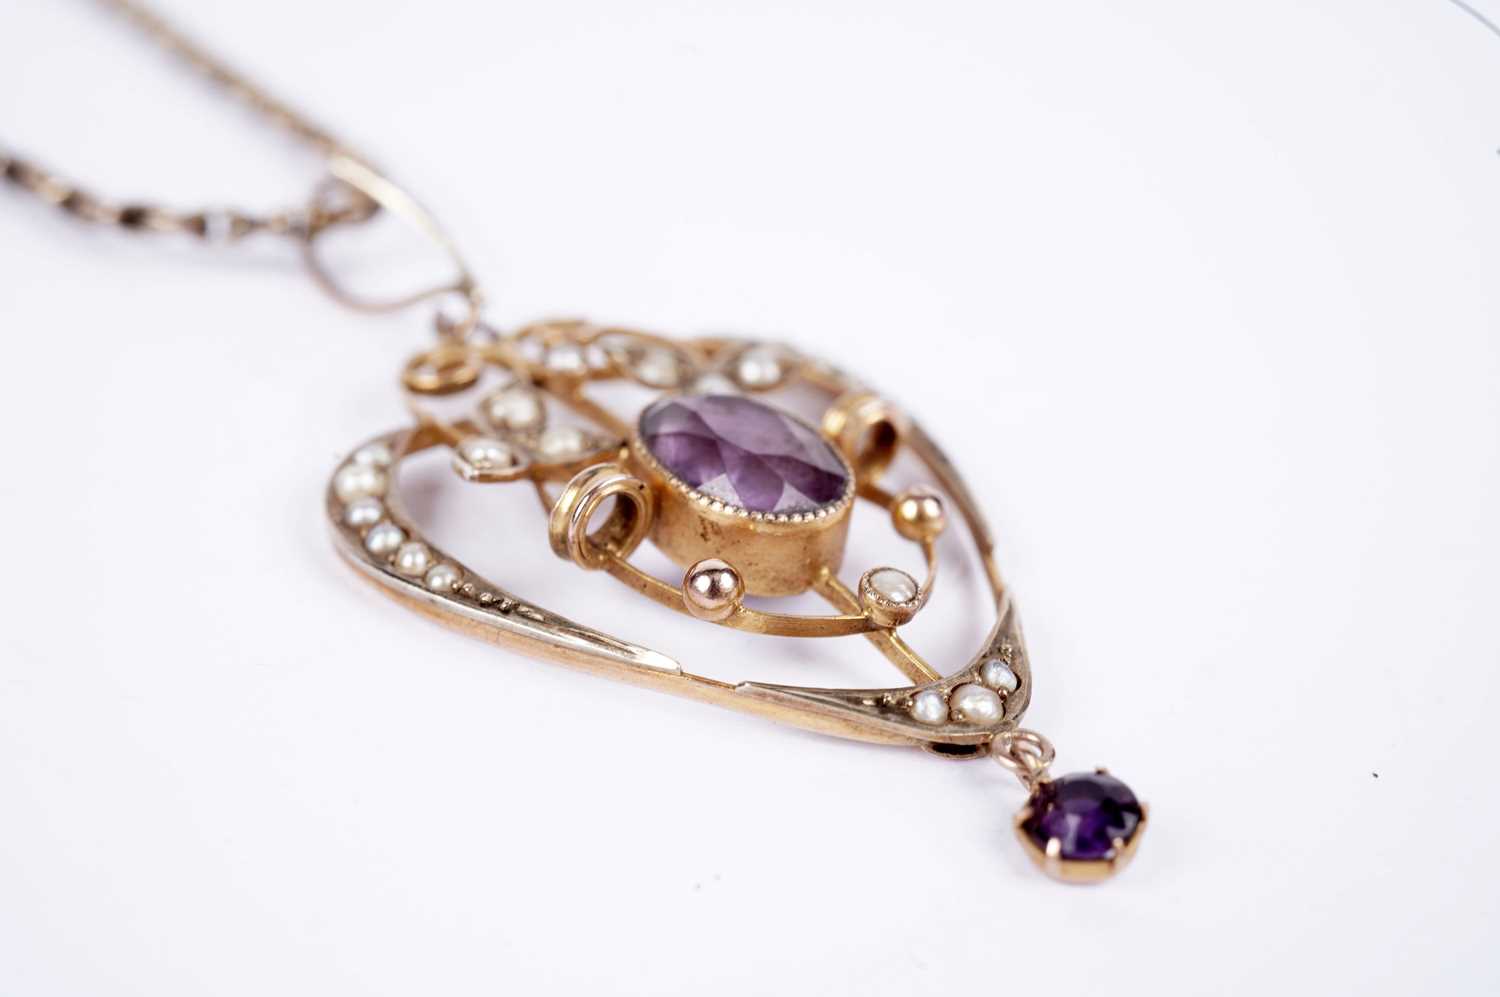 An Edwardian amethyst and seed pearl drop pendant - Image 3 of 4